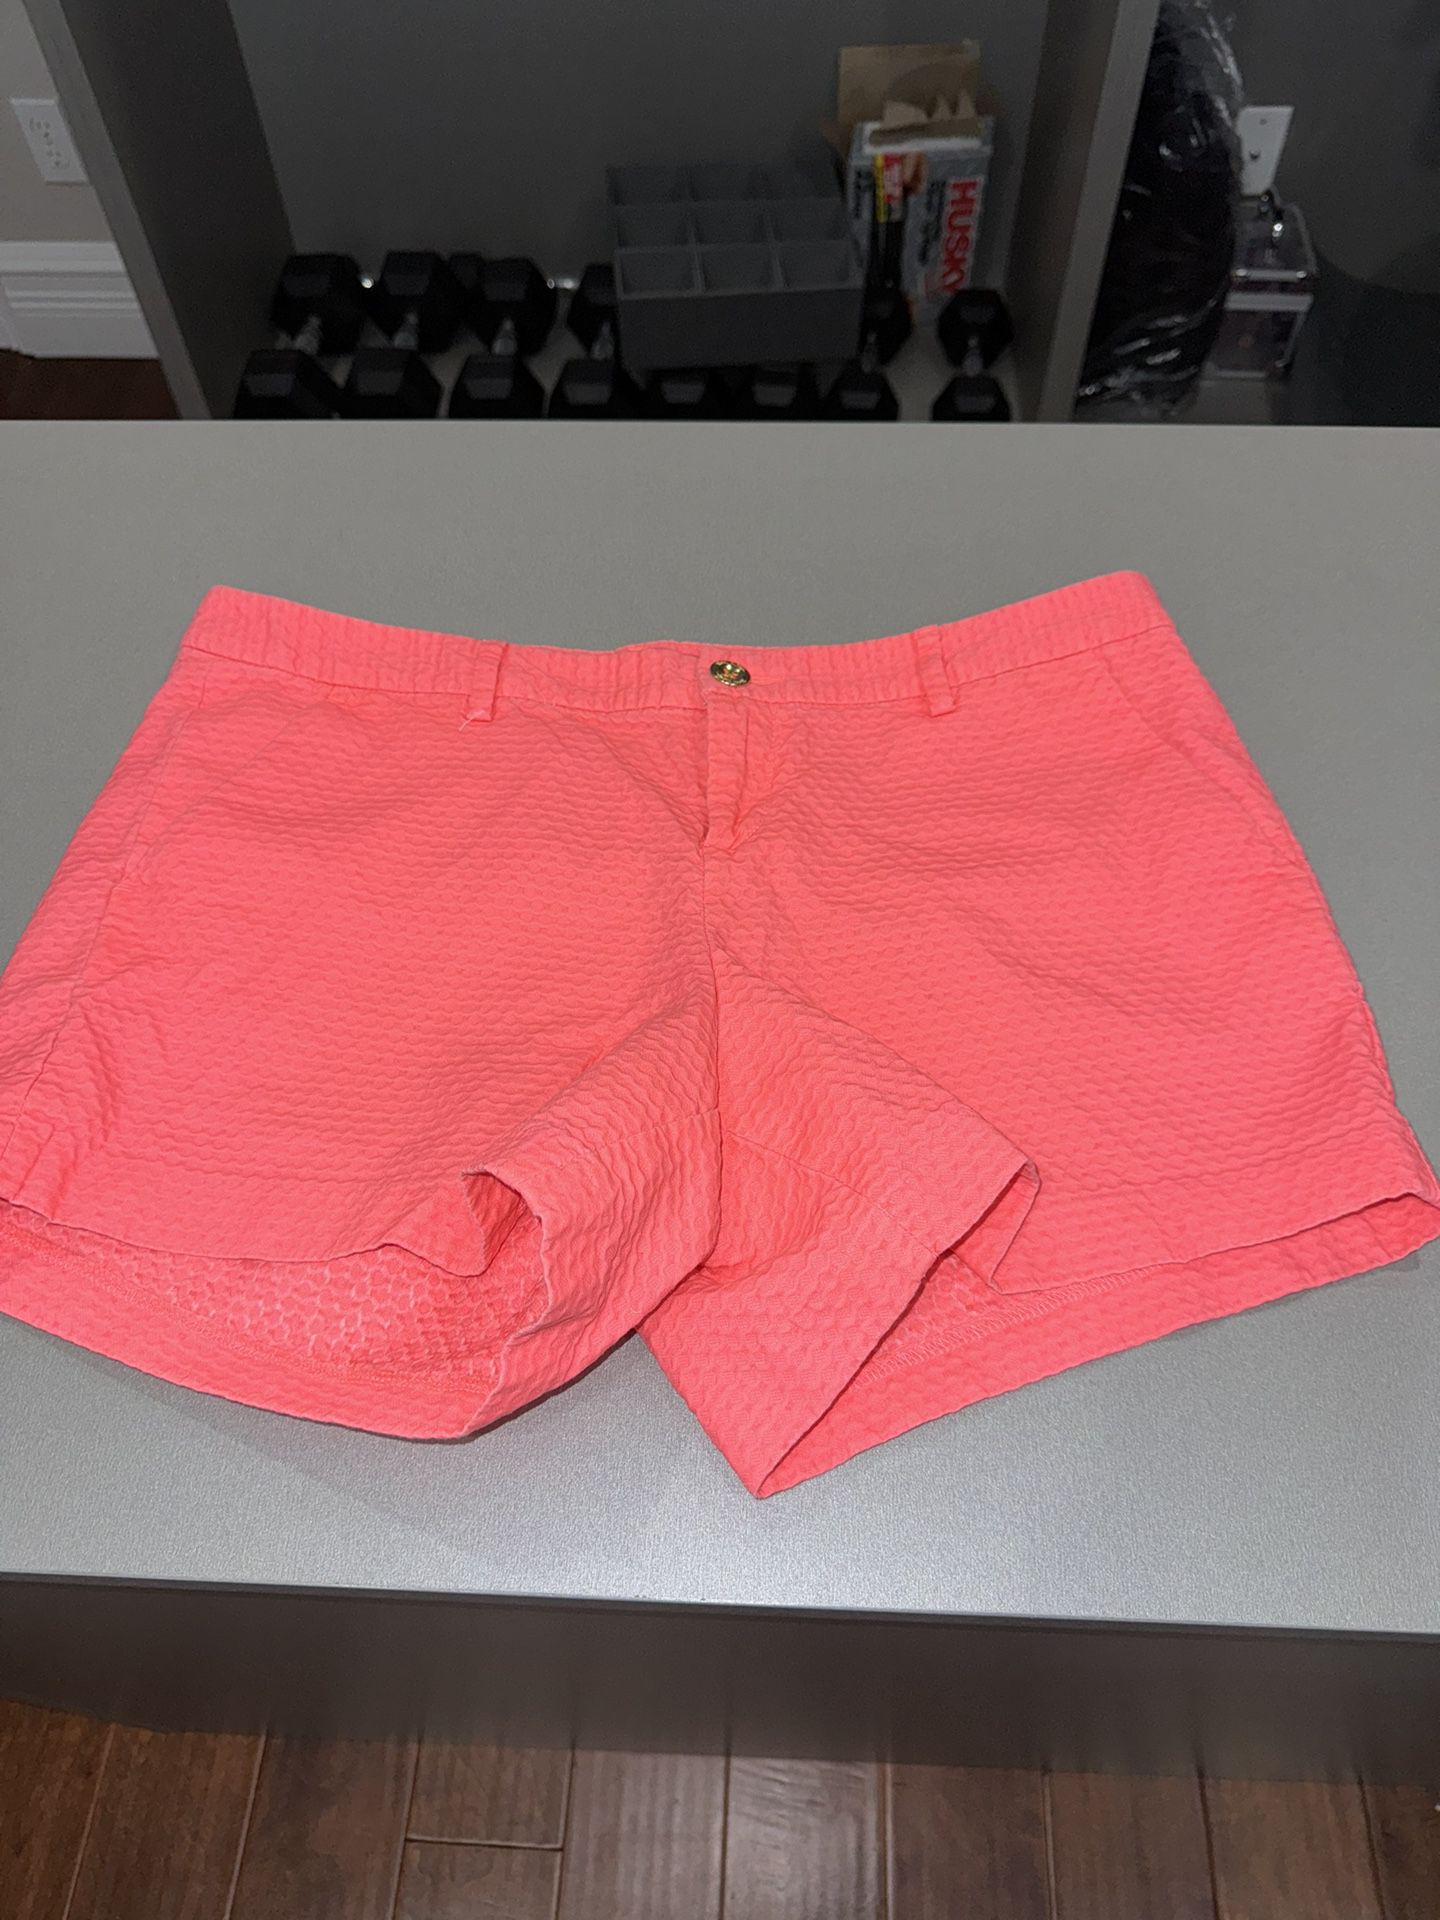 Women’s Size 14 Lilly Pulitzer Shorts 